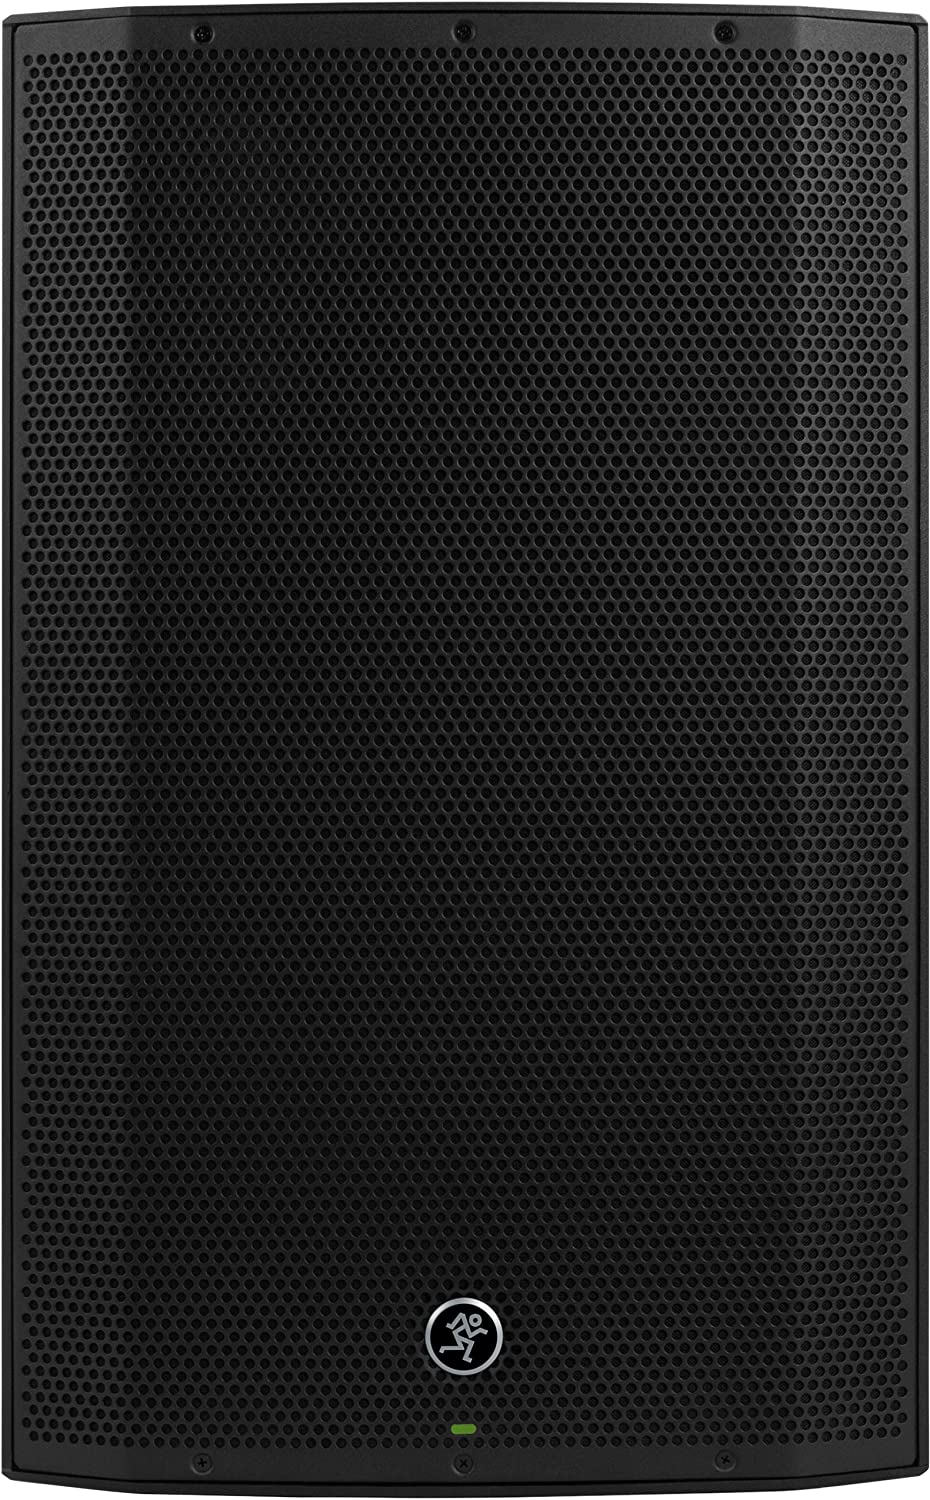 Mackie Thump12A Powered Series, 12-Inch 1300-Watt PA DJ Loudspeaker with High Performance Amplifiers Built-in Mixers and Power Factor Correction - Black (THUMP12A)